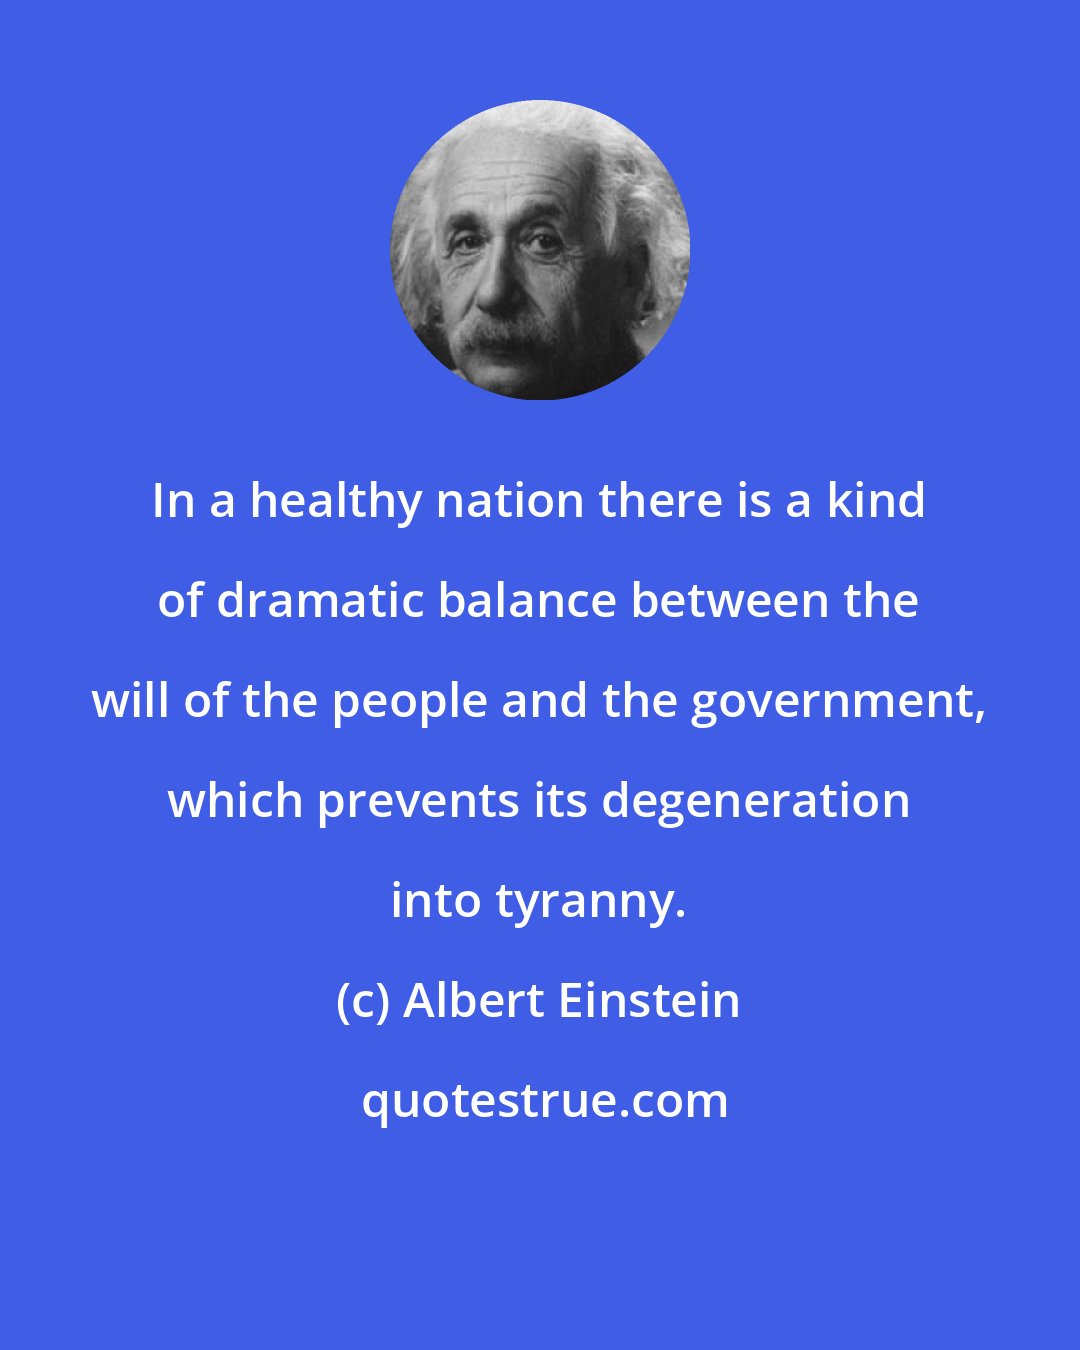 Albert Einstein: In a healthy nation there is a kind of dramatic balance between the will of the people and the government, which prevents its degeneration into tyranny.